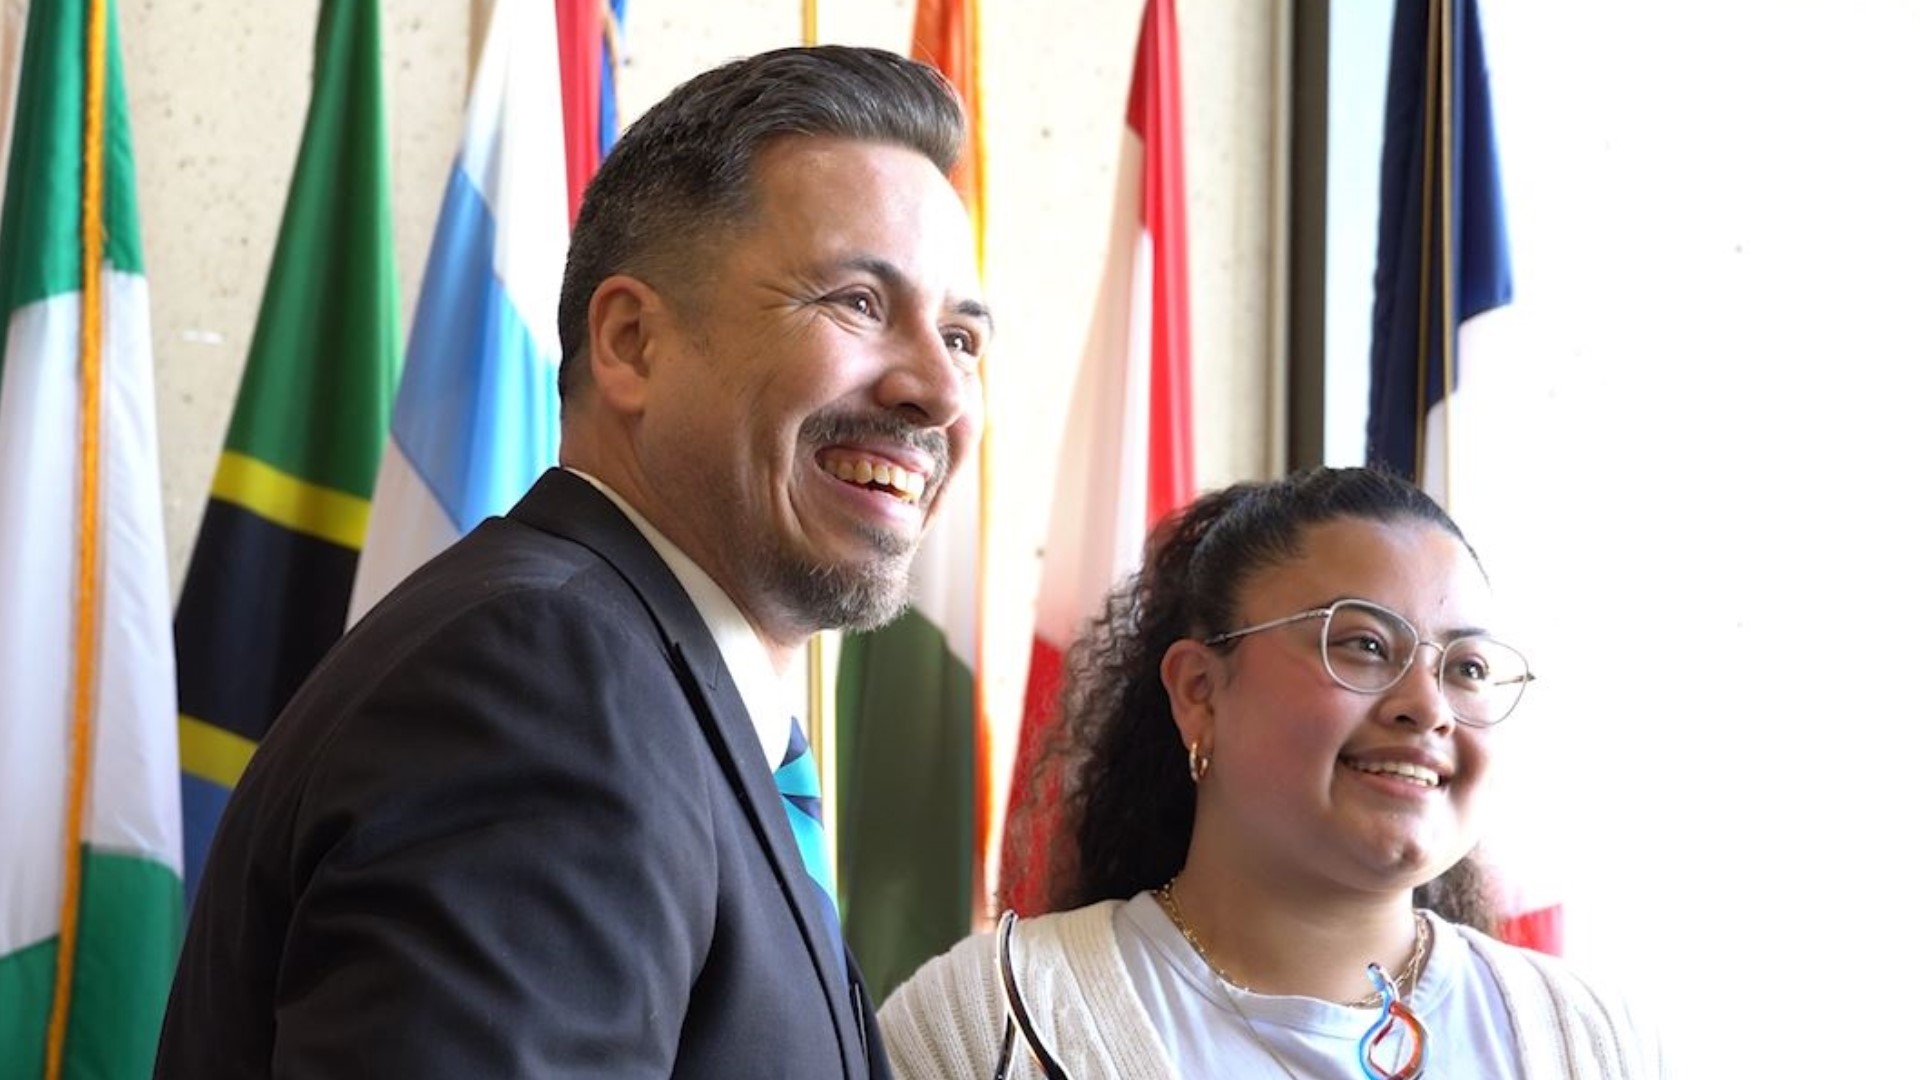 Joaquín Zihuatanejo is now the first poet laureate of the City of Dallas. Madison Rojas is the first youth poet laureate. Together, they will inspire future poets.